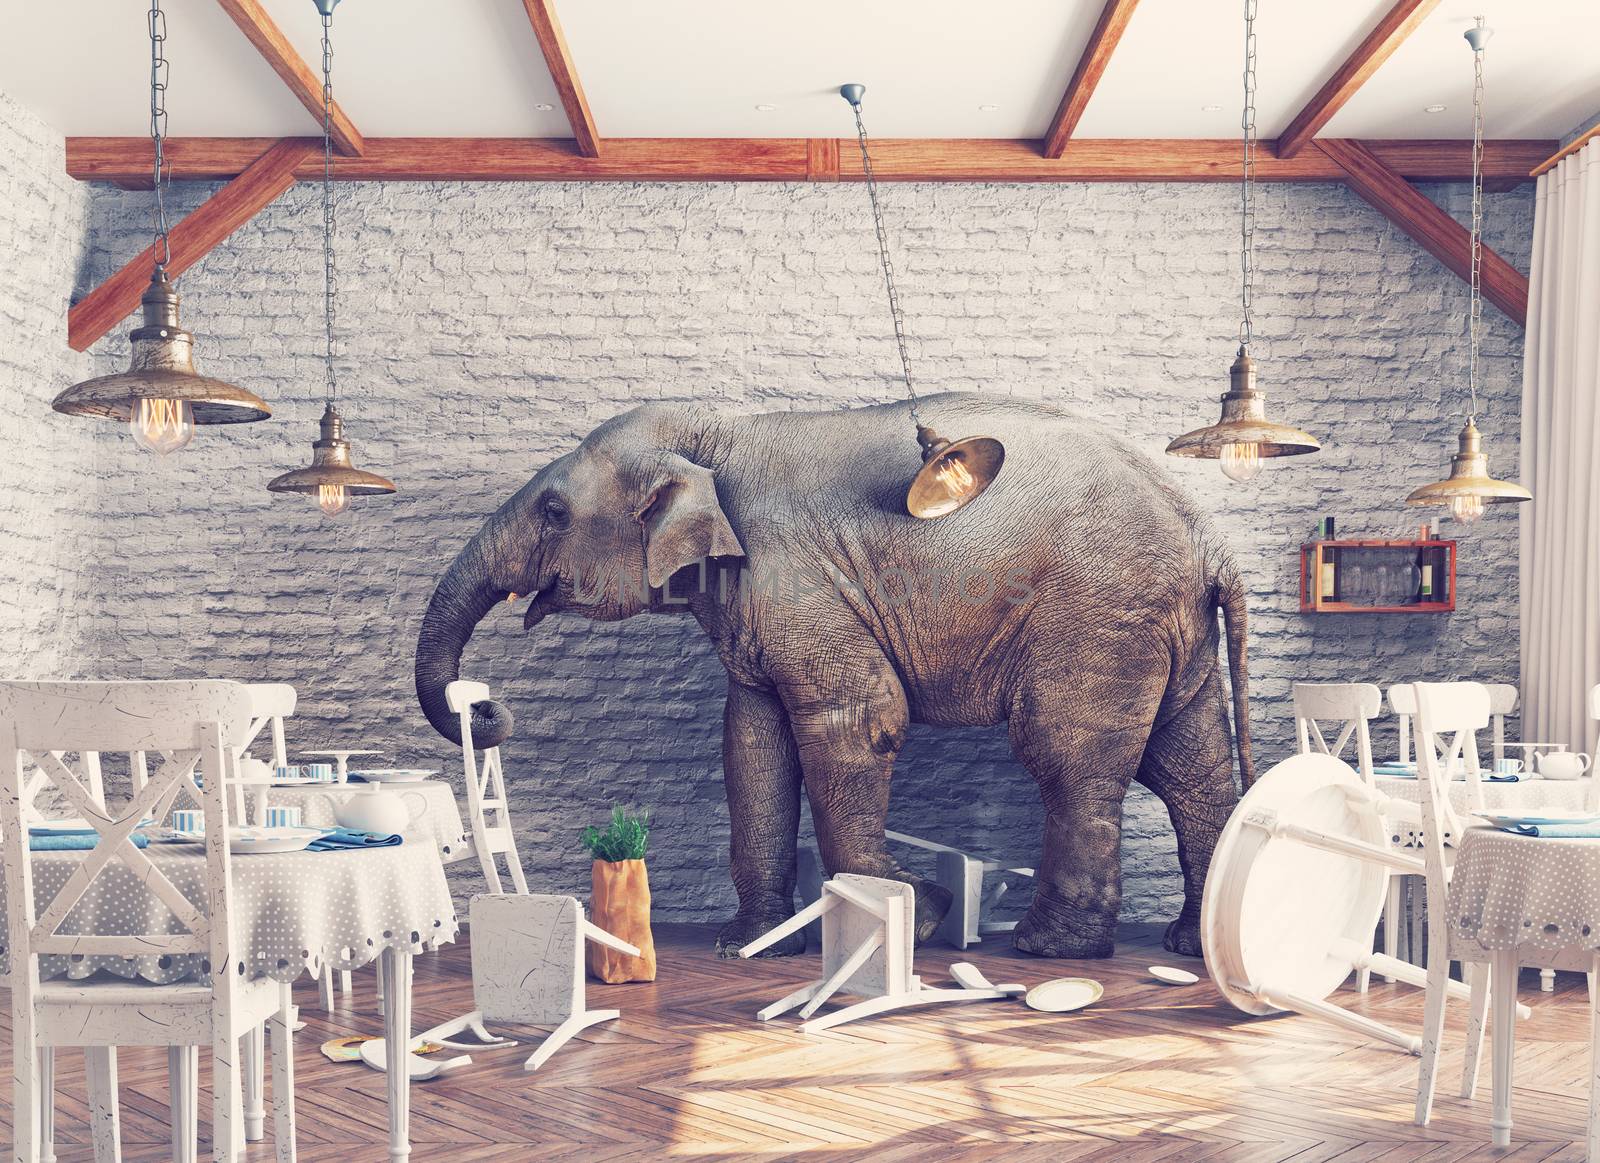 The elephant  in a restaurant by vicnt